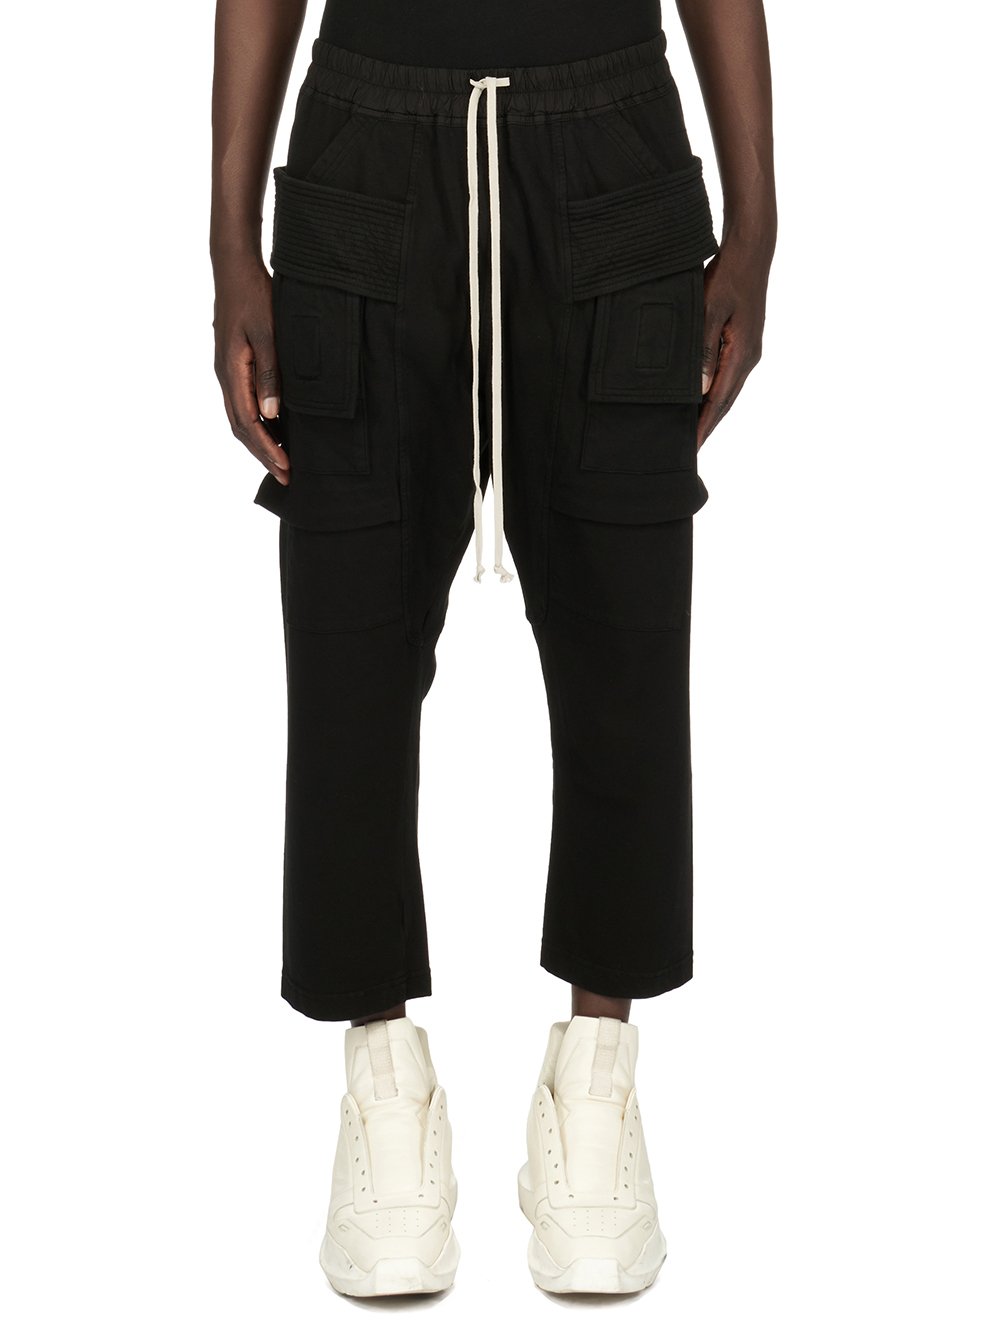 DRKSHDW FW23 LUXOR CREATCH CARGO CROPPED DRAWSTRING IN BLACK COMPACT HEAVY COTTON JERSEY